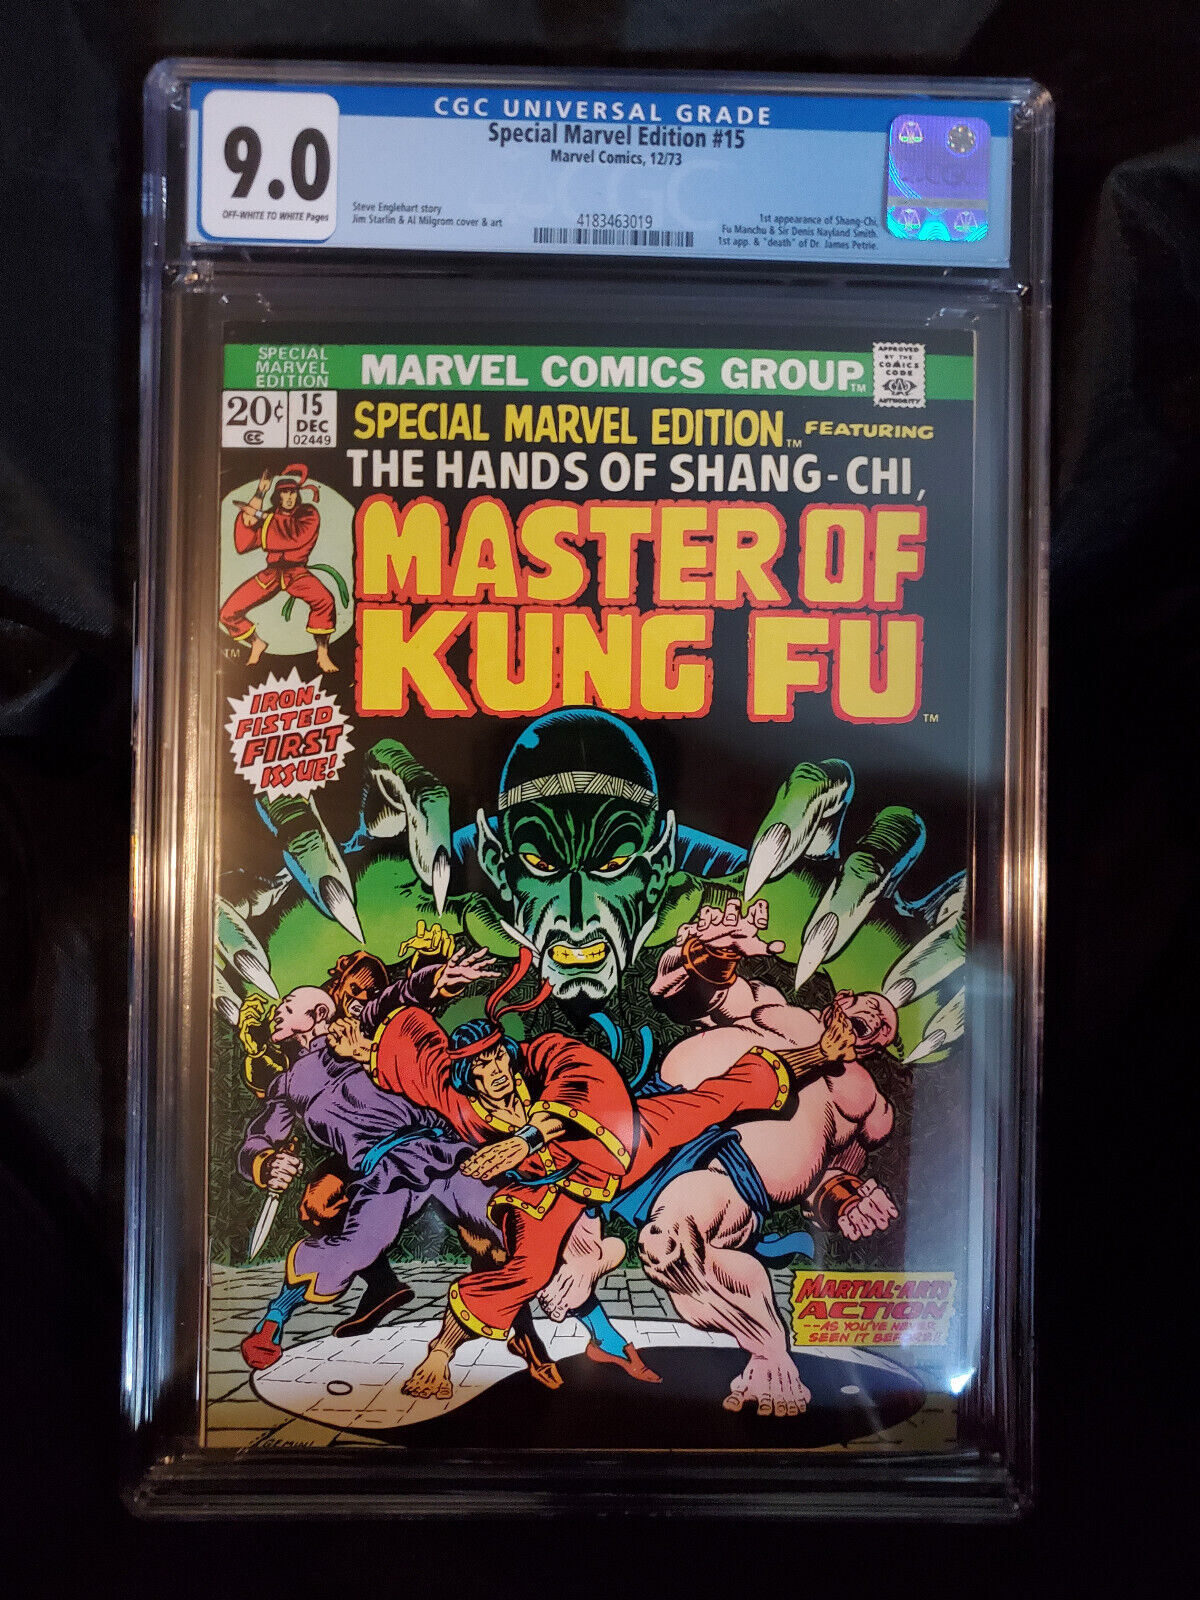 Special Marvel Edition 15 1973 CGC 90 Master of Kung Fu begins